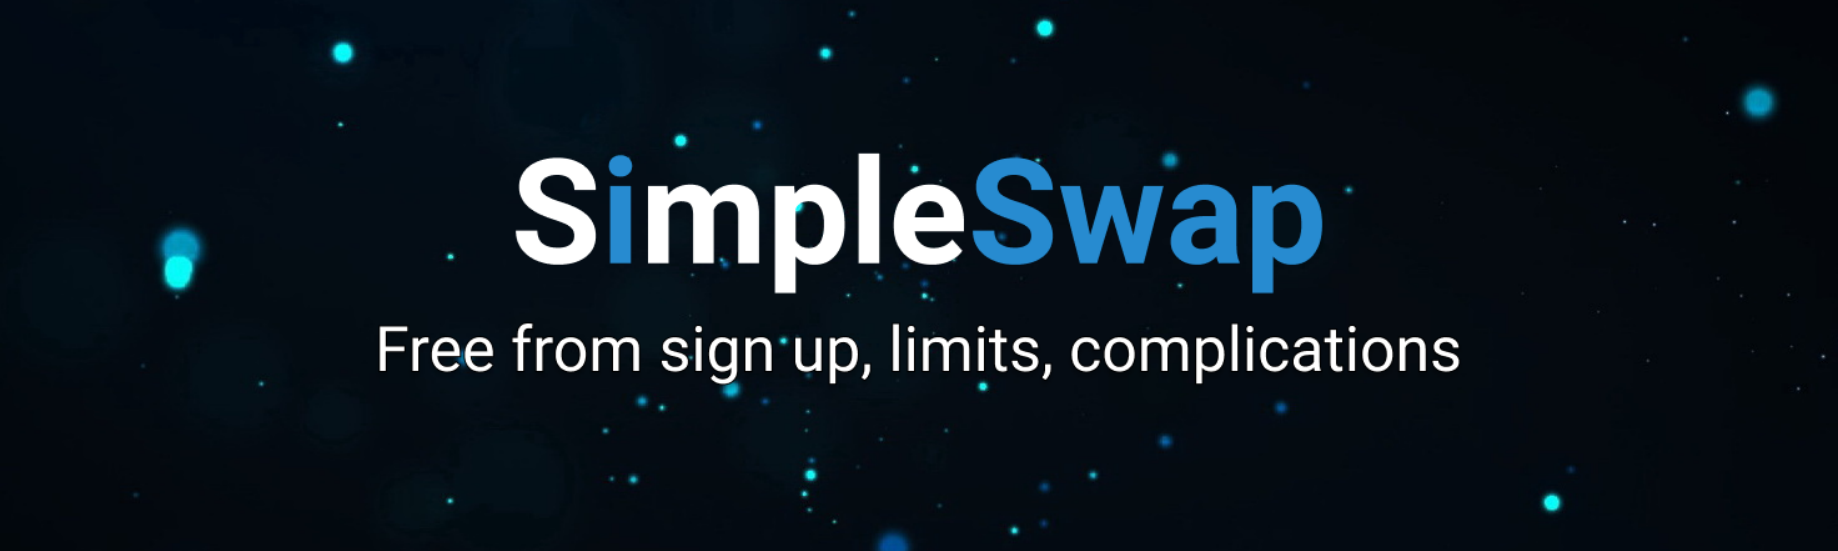 SimpleSwap — new cryptocurrency exchange - Khong Le - Medium